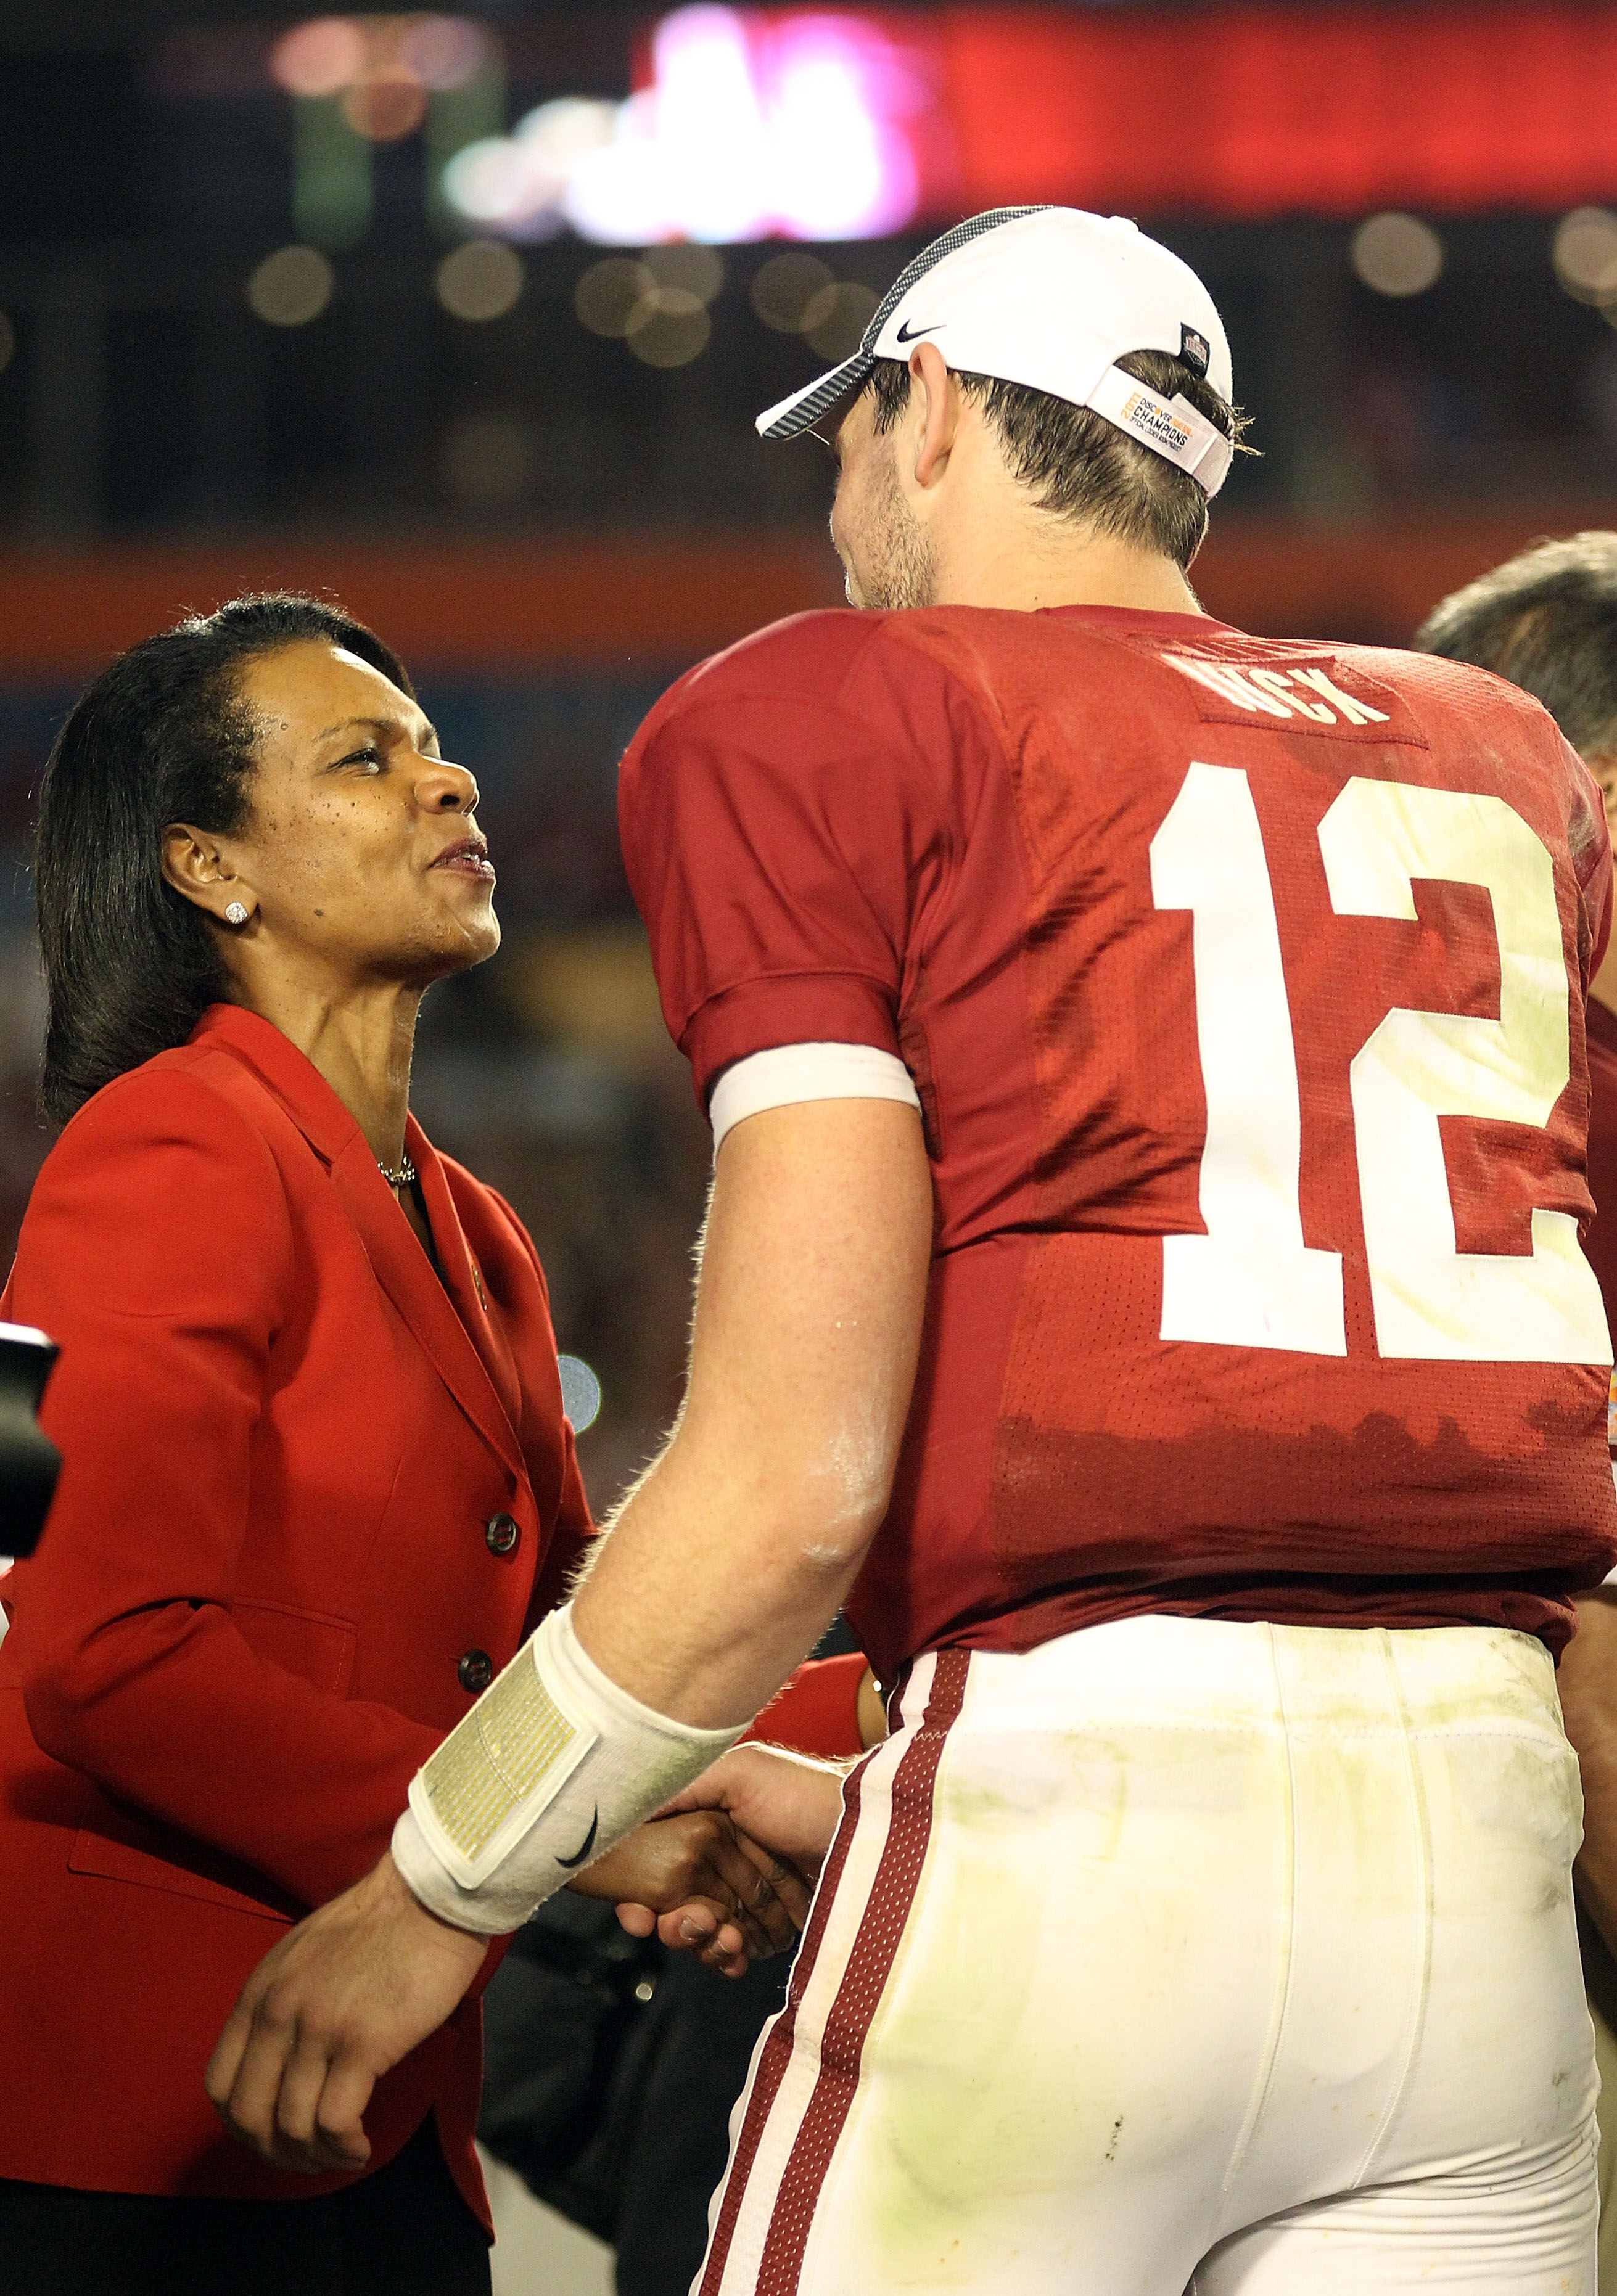 MIAMI, FL - JANUARY 03:  Condoleezza Rice (L) congratulates Orange Bowl MVP Andrew Luck of the Stanford Cardinal after Stanford won 40-12 against the Virginai Tech Hokies during the 2011 Discover Orange Bowl at Sun Life Stadium on January 3, 2011 in Miami